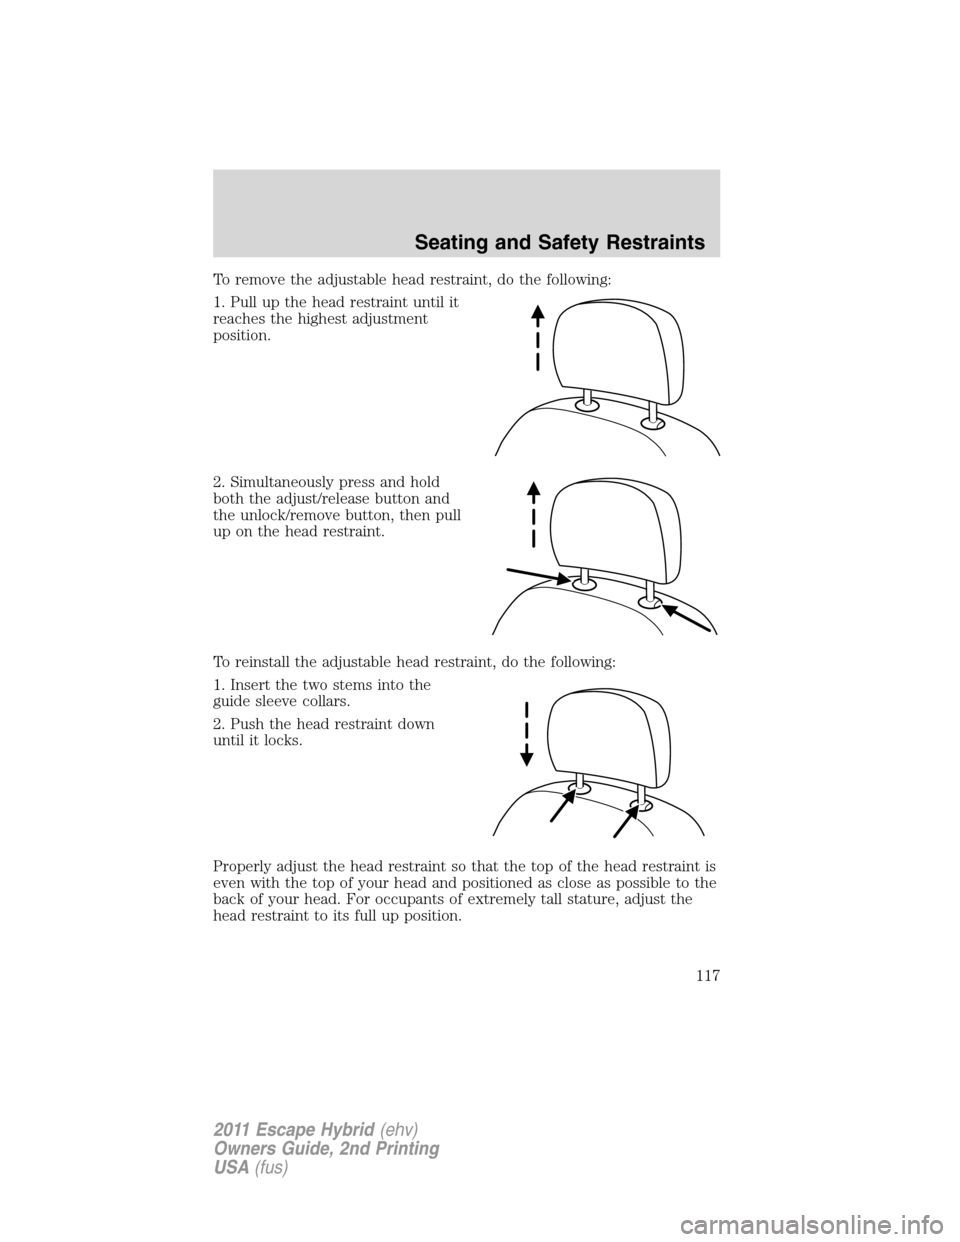 FORD ESCAPE HYBRID 2011 2.G Owners Manual To remove the adjustable head restraint, do the following:
1. Pull up the head restraint until it
reaches the highest adjustment
position.
2. Simultaneously press and hold
both the adjust/release butt